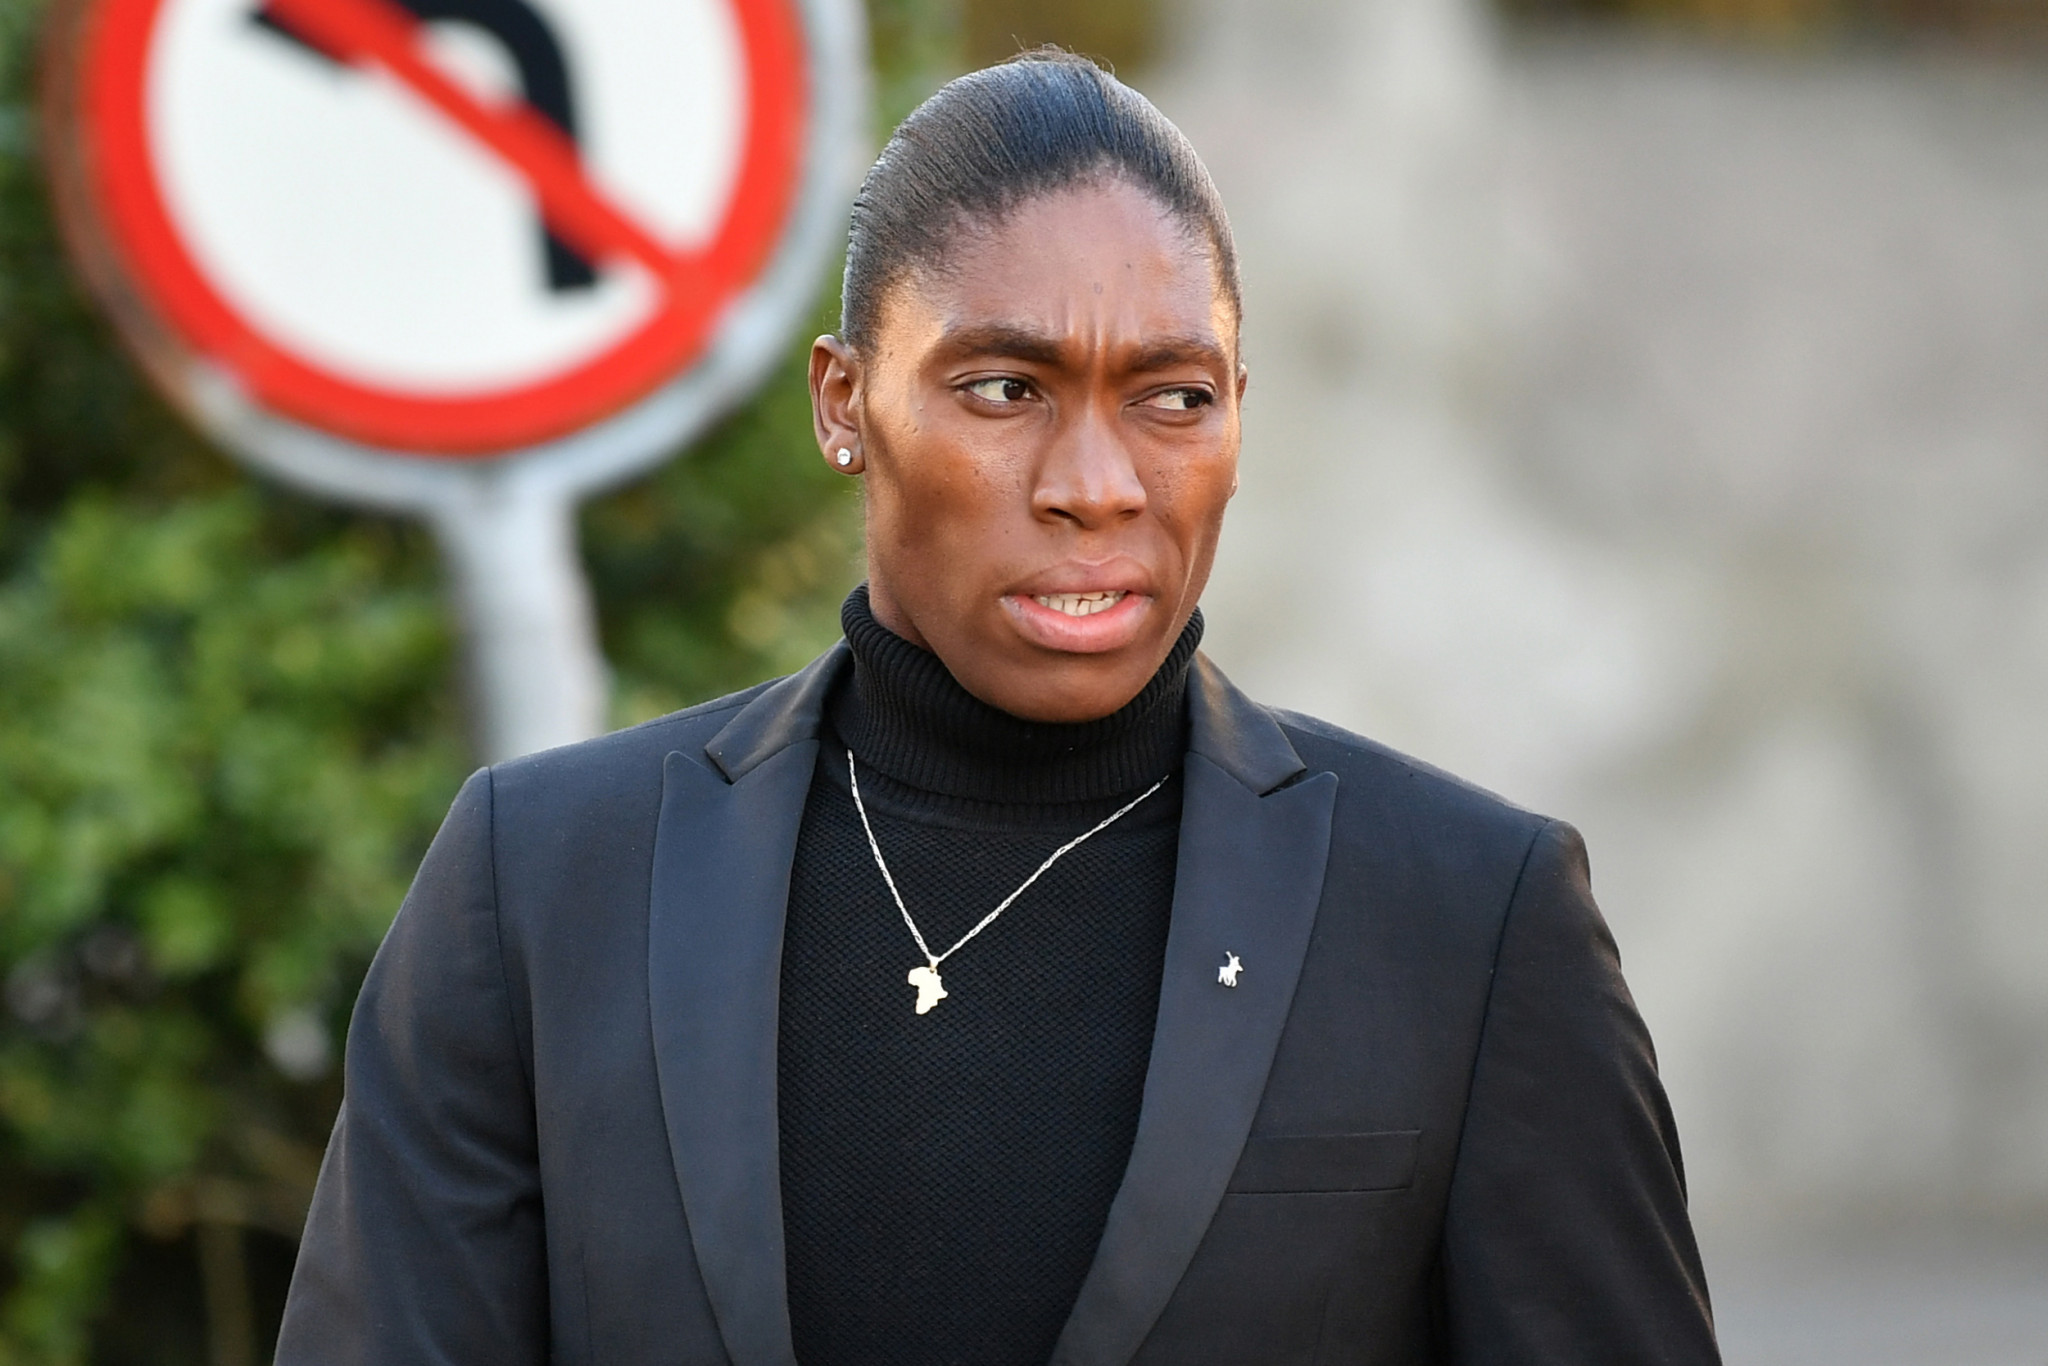 Semenya reveals defence against IAAF funded by private donors, not South African Government